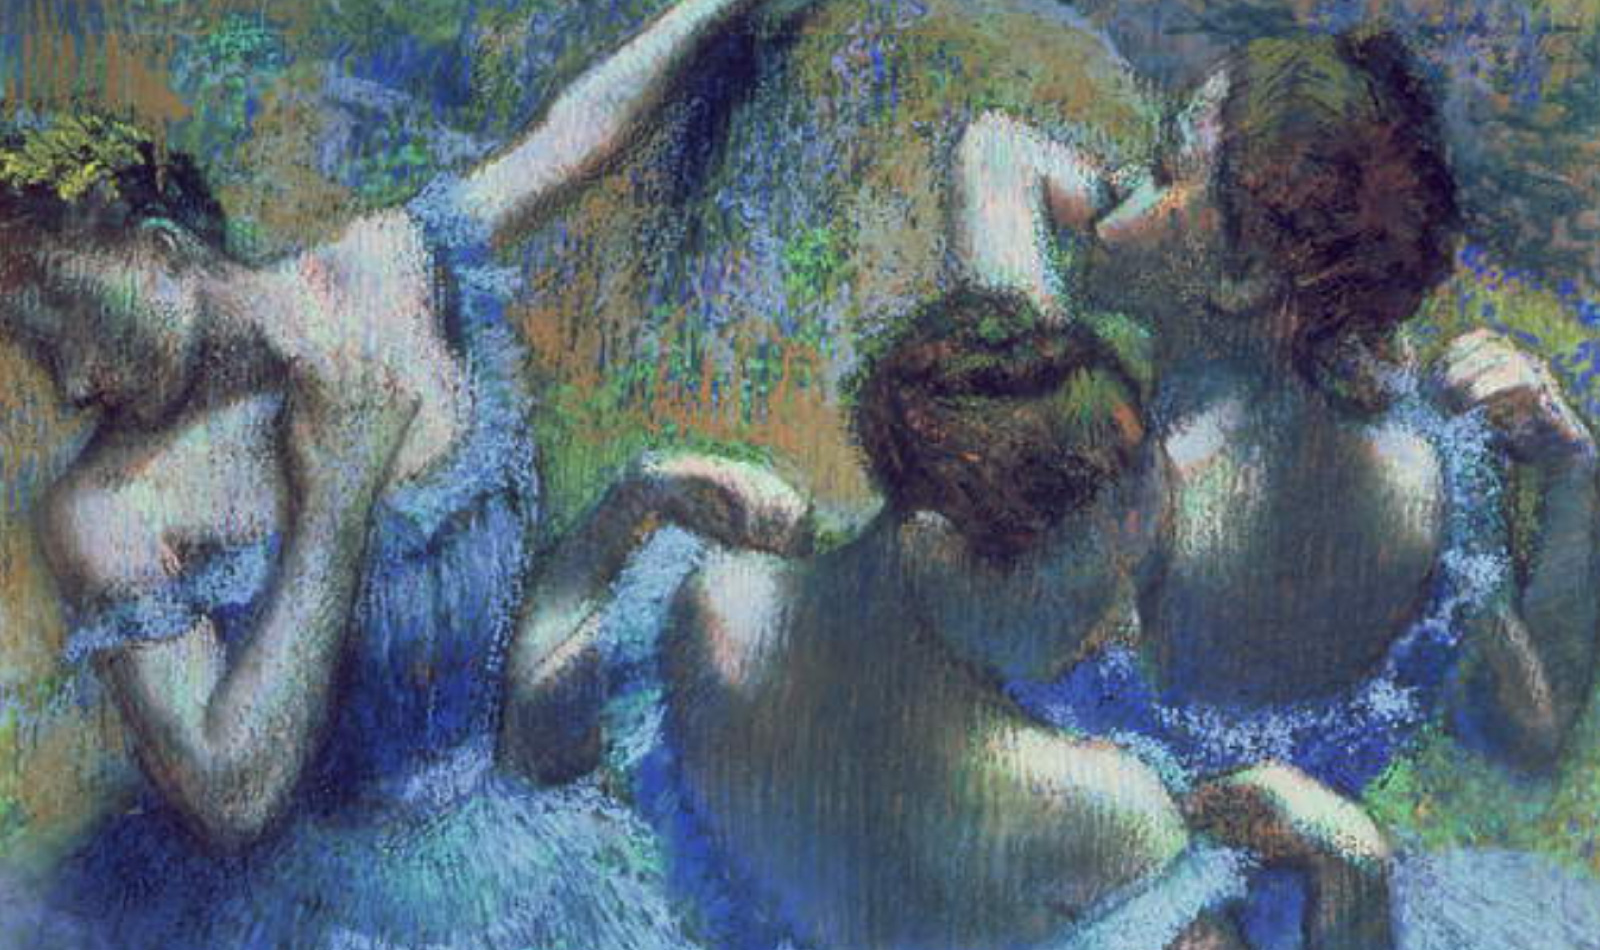 The opera Blue Dancers by Degas